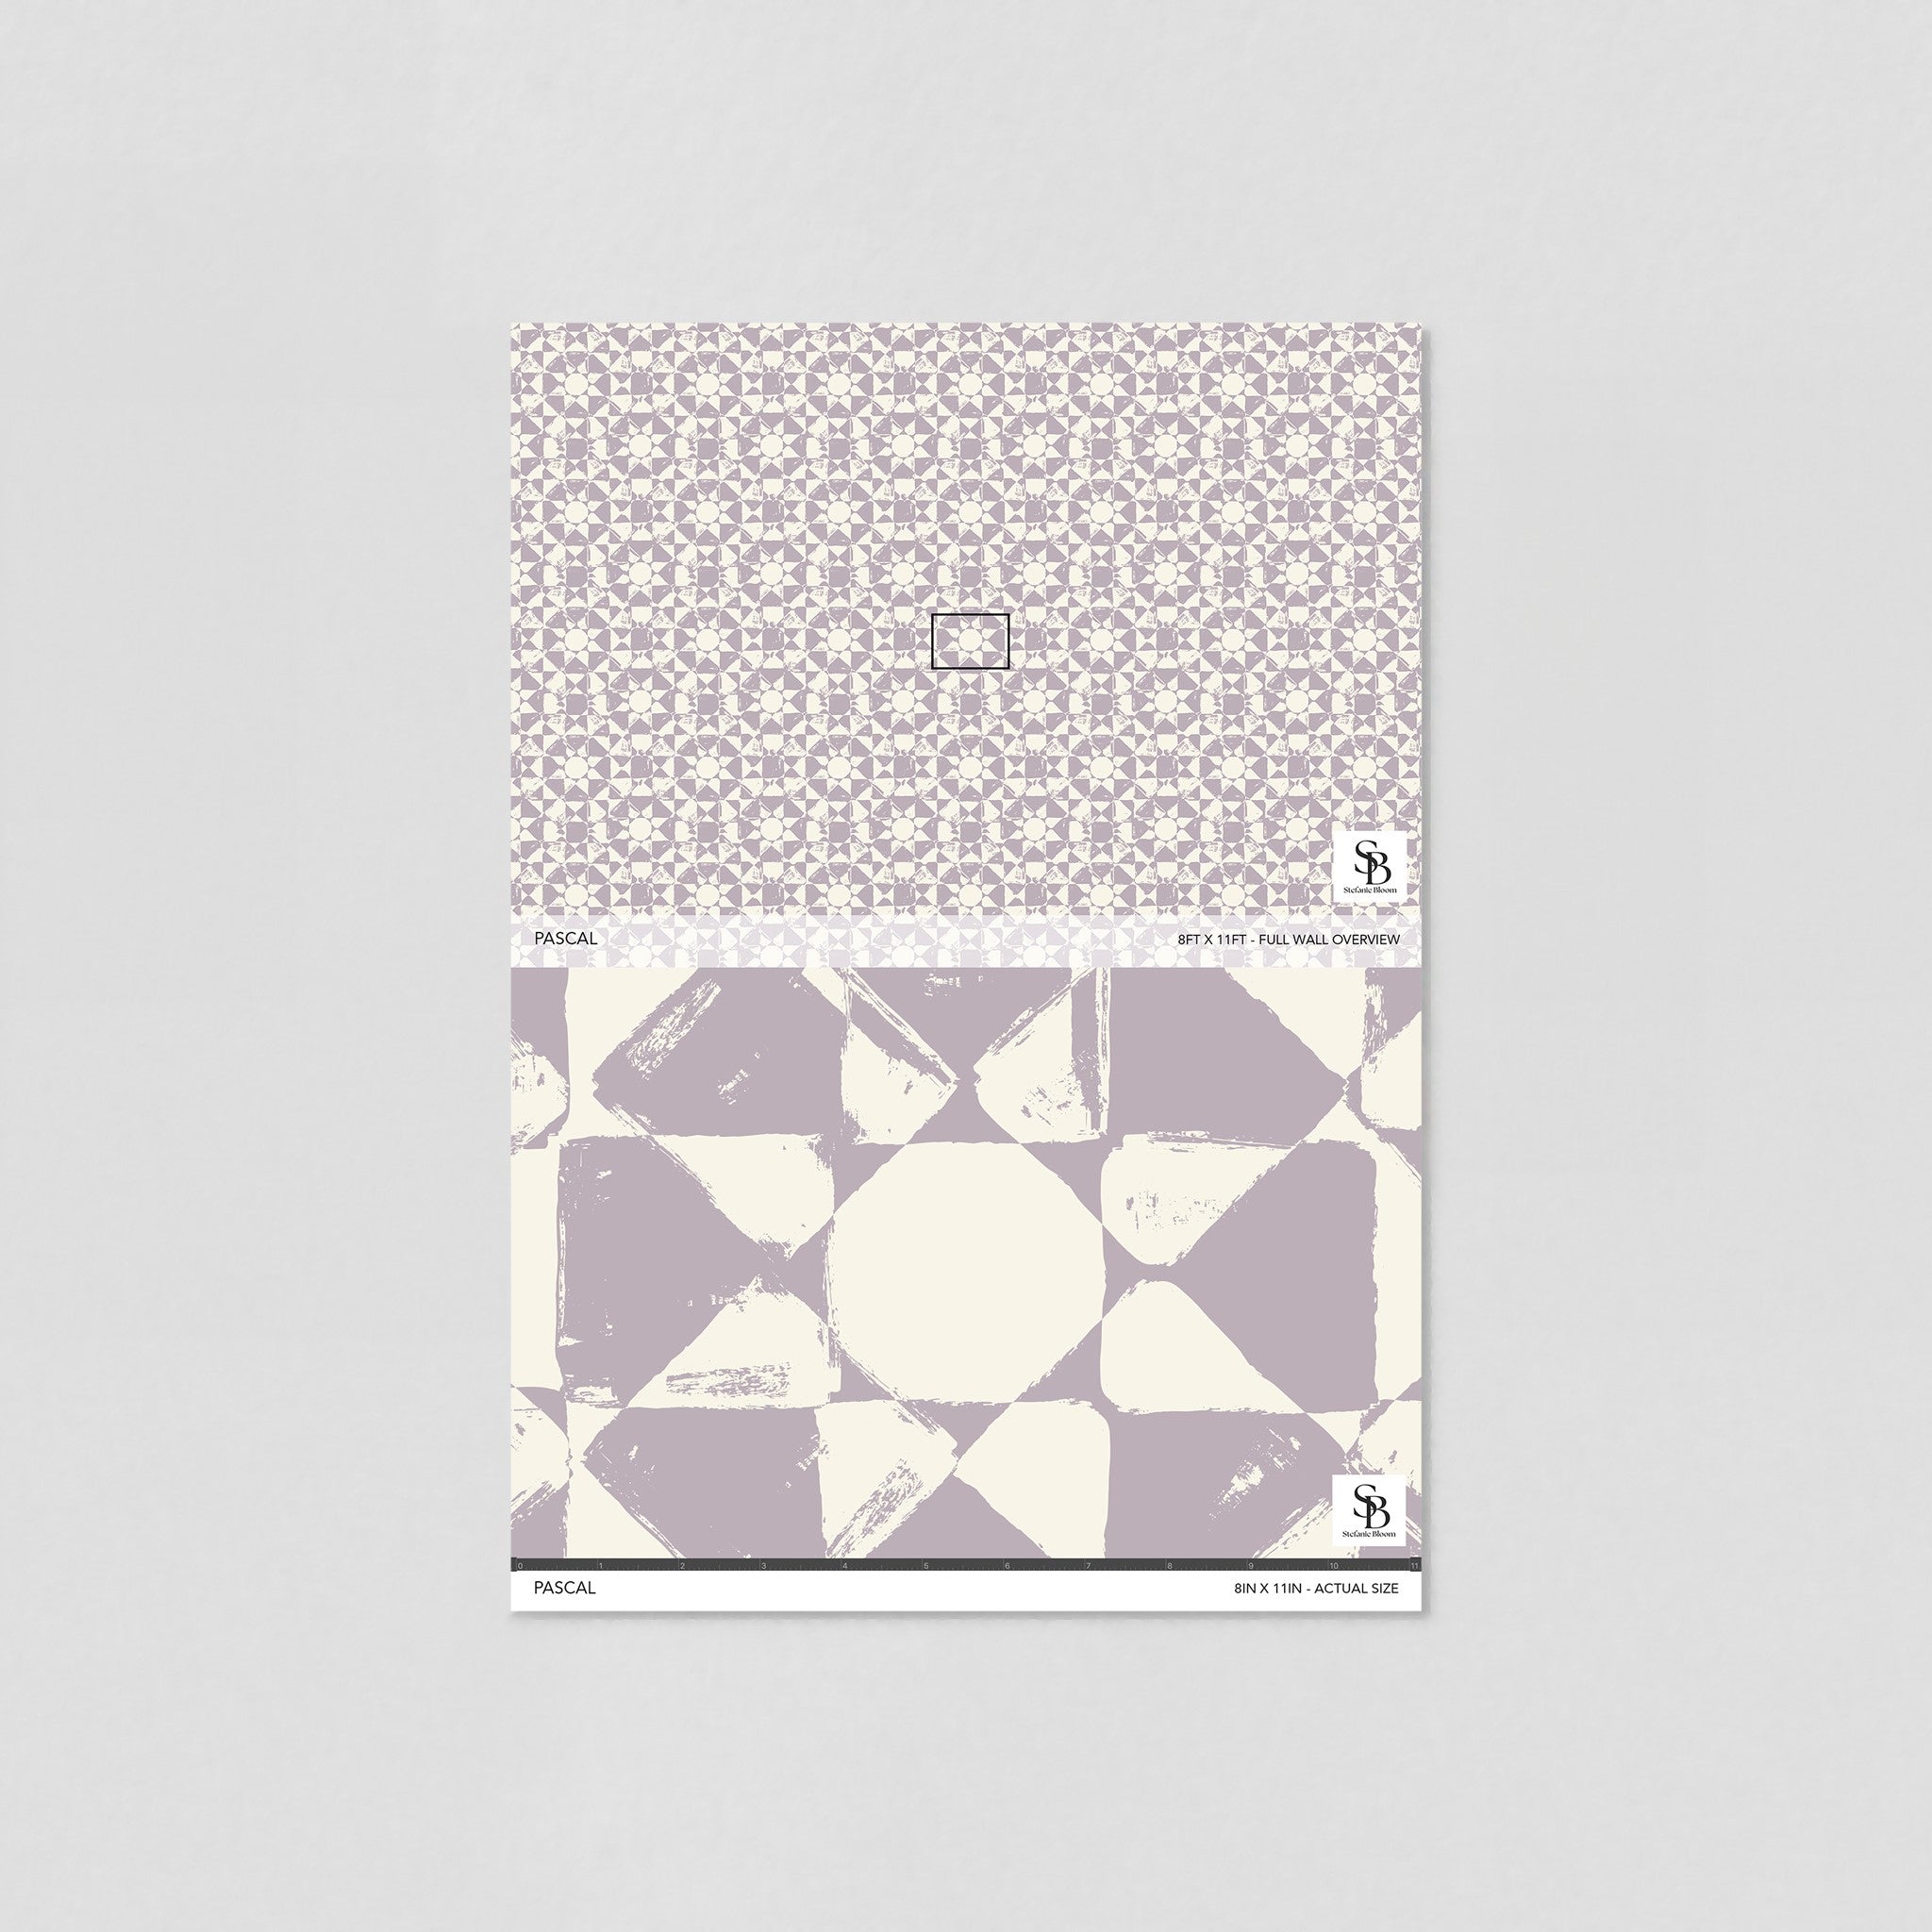 "Pascal Wallpaper sample by Wall Blush, showcasing geometric pattern in a simulated room setting."